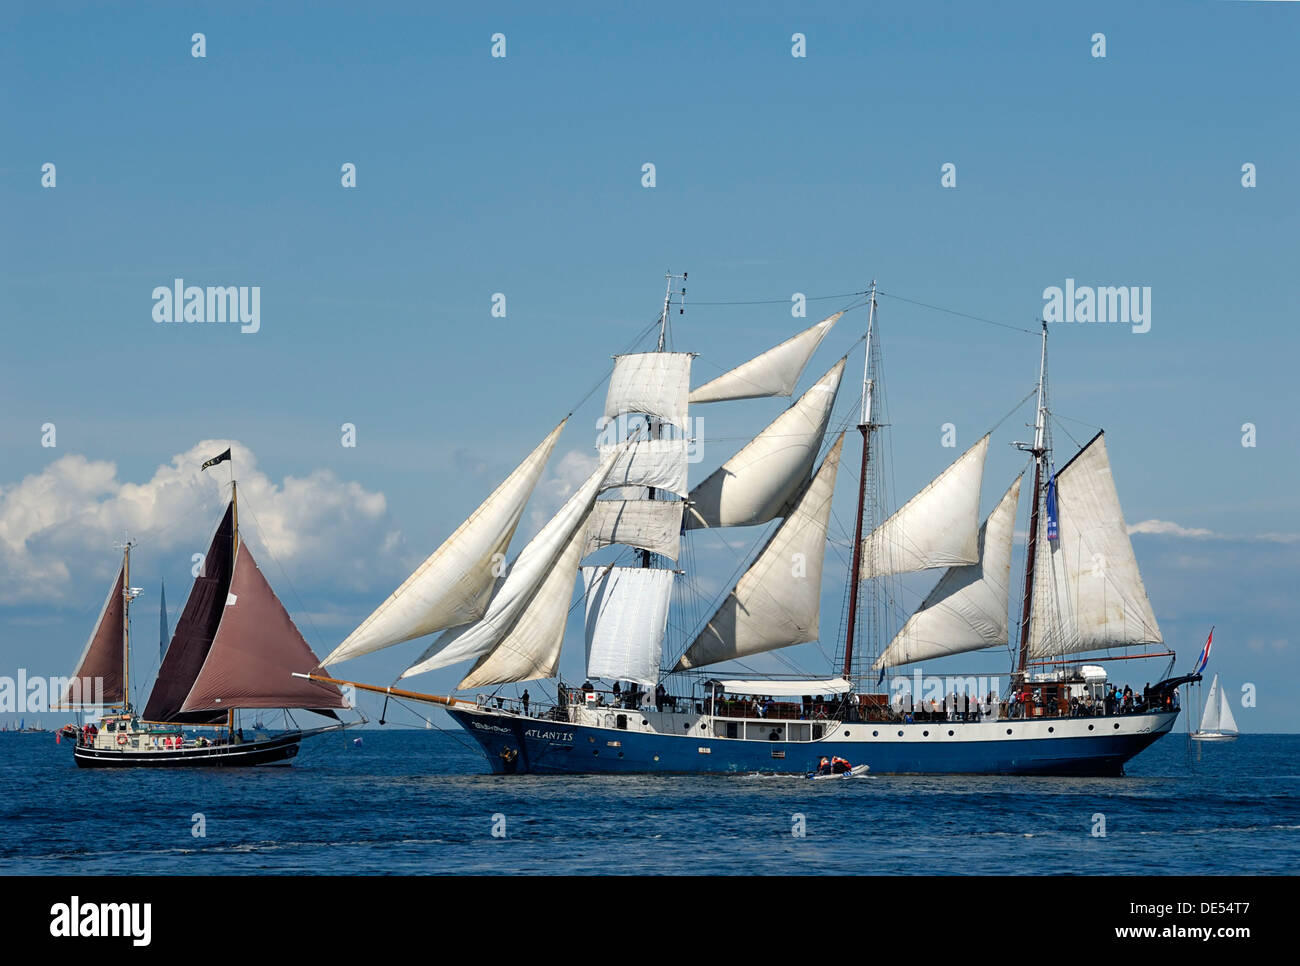 Meeting of a sail boat with a tall ship, three-masted barquentine, under full sail, Kieler Woche 2010, Schleswig-Holstein Stock Photo